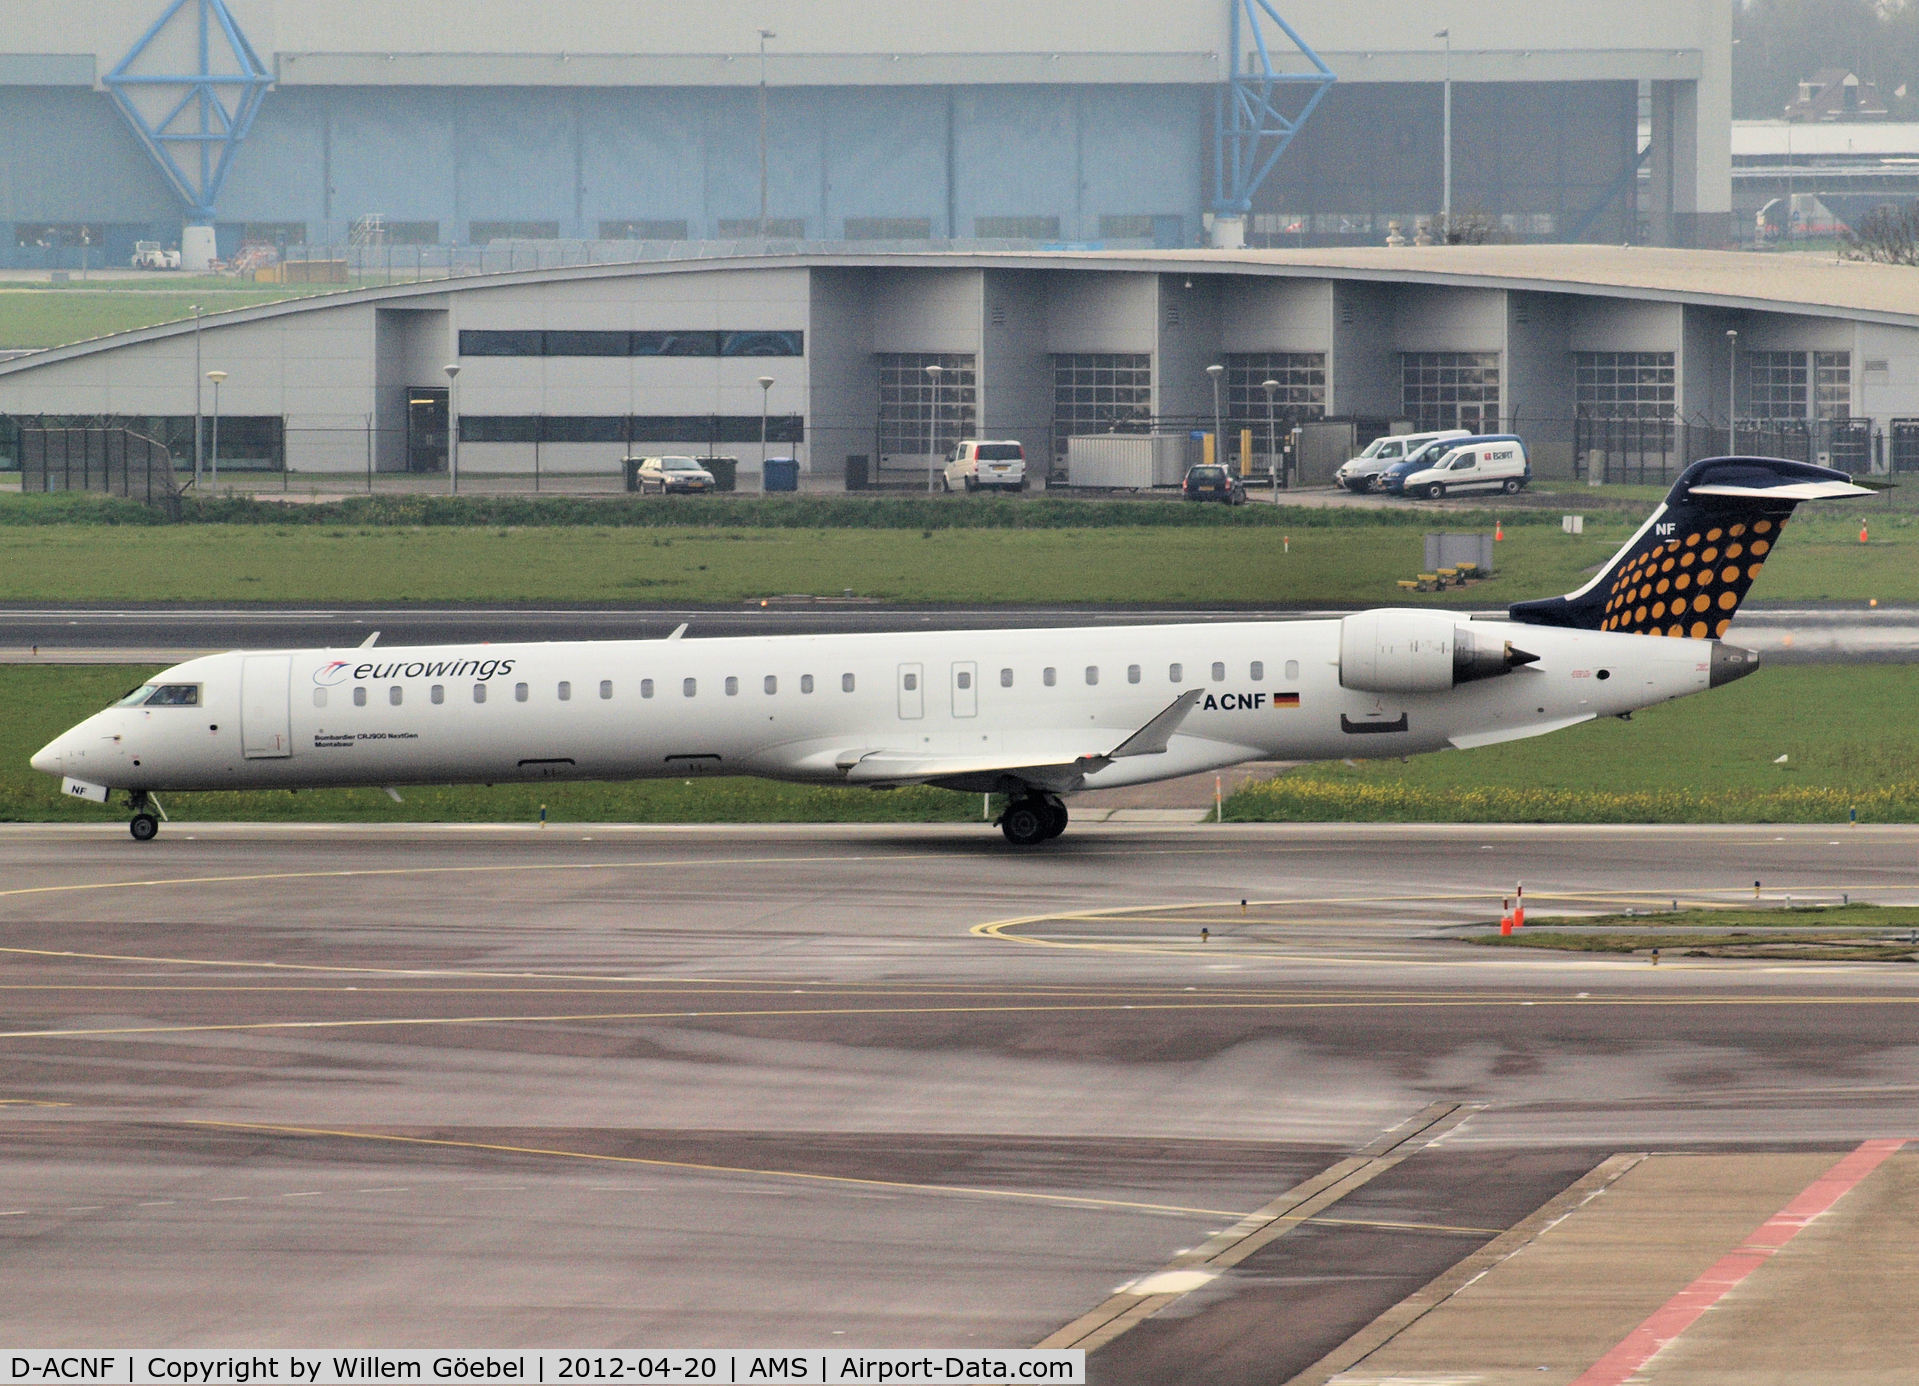 D-ACNF, 2009 Bombardier CRJ-900 (CL-600-2D24) C/N 15243, Taxi to the runway 24 of Schiphol Airport